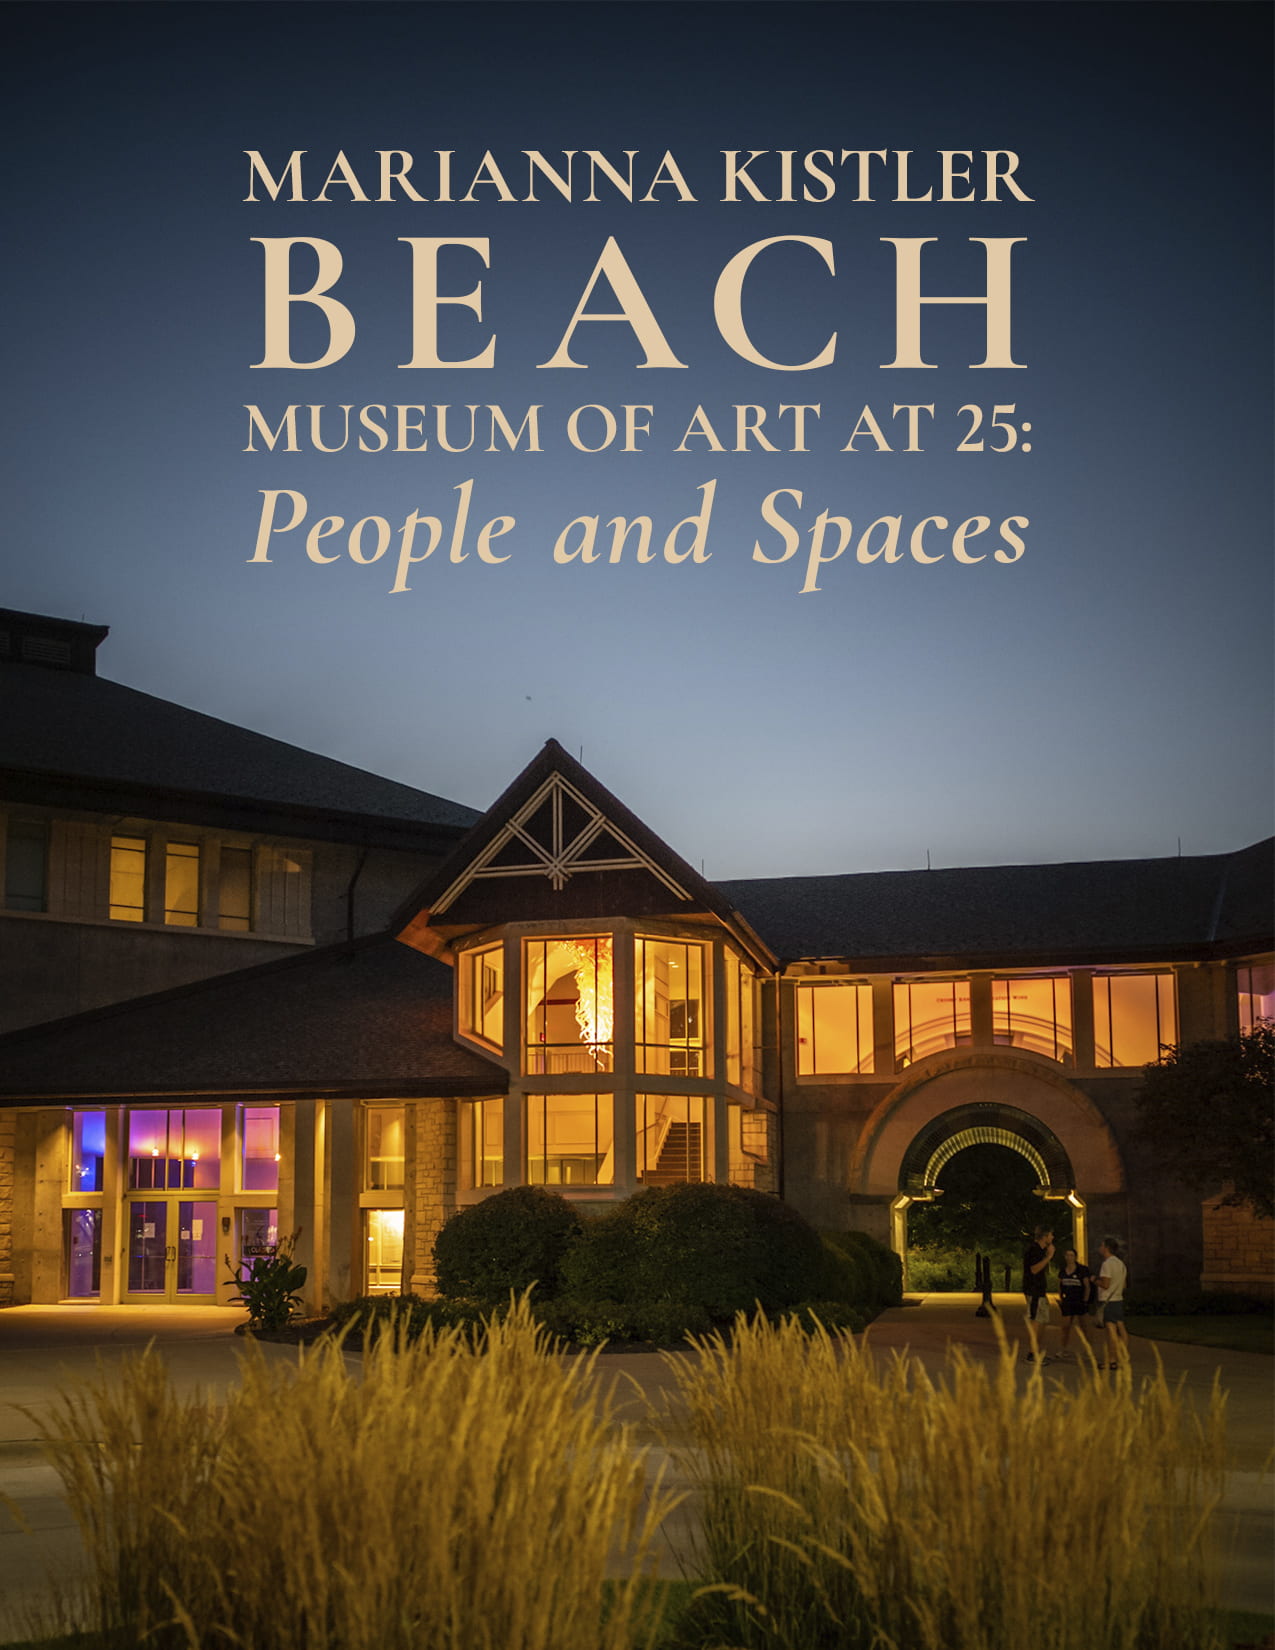 Cover image of the e-book "Marianna Kistler Beach Museum of Art at 25: People and Spaces" 